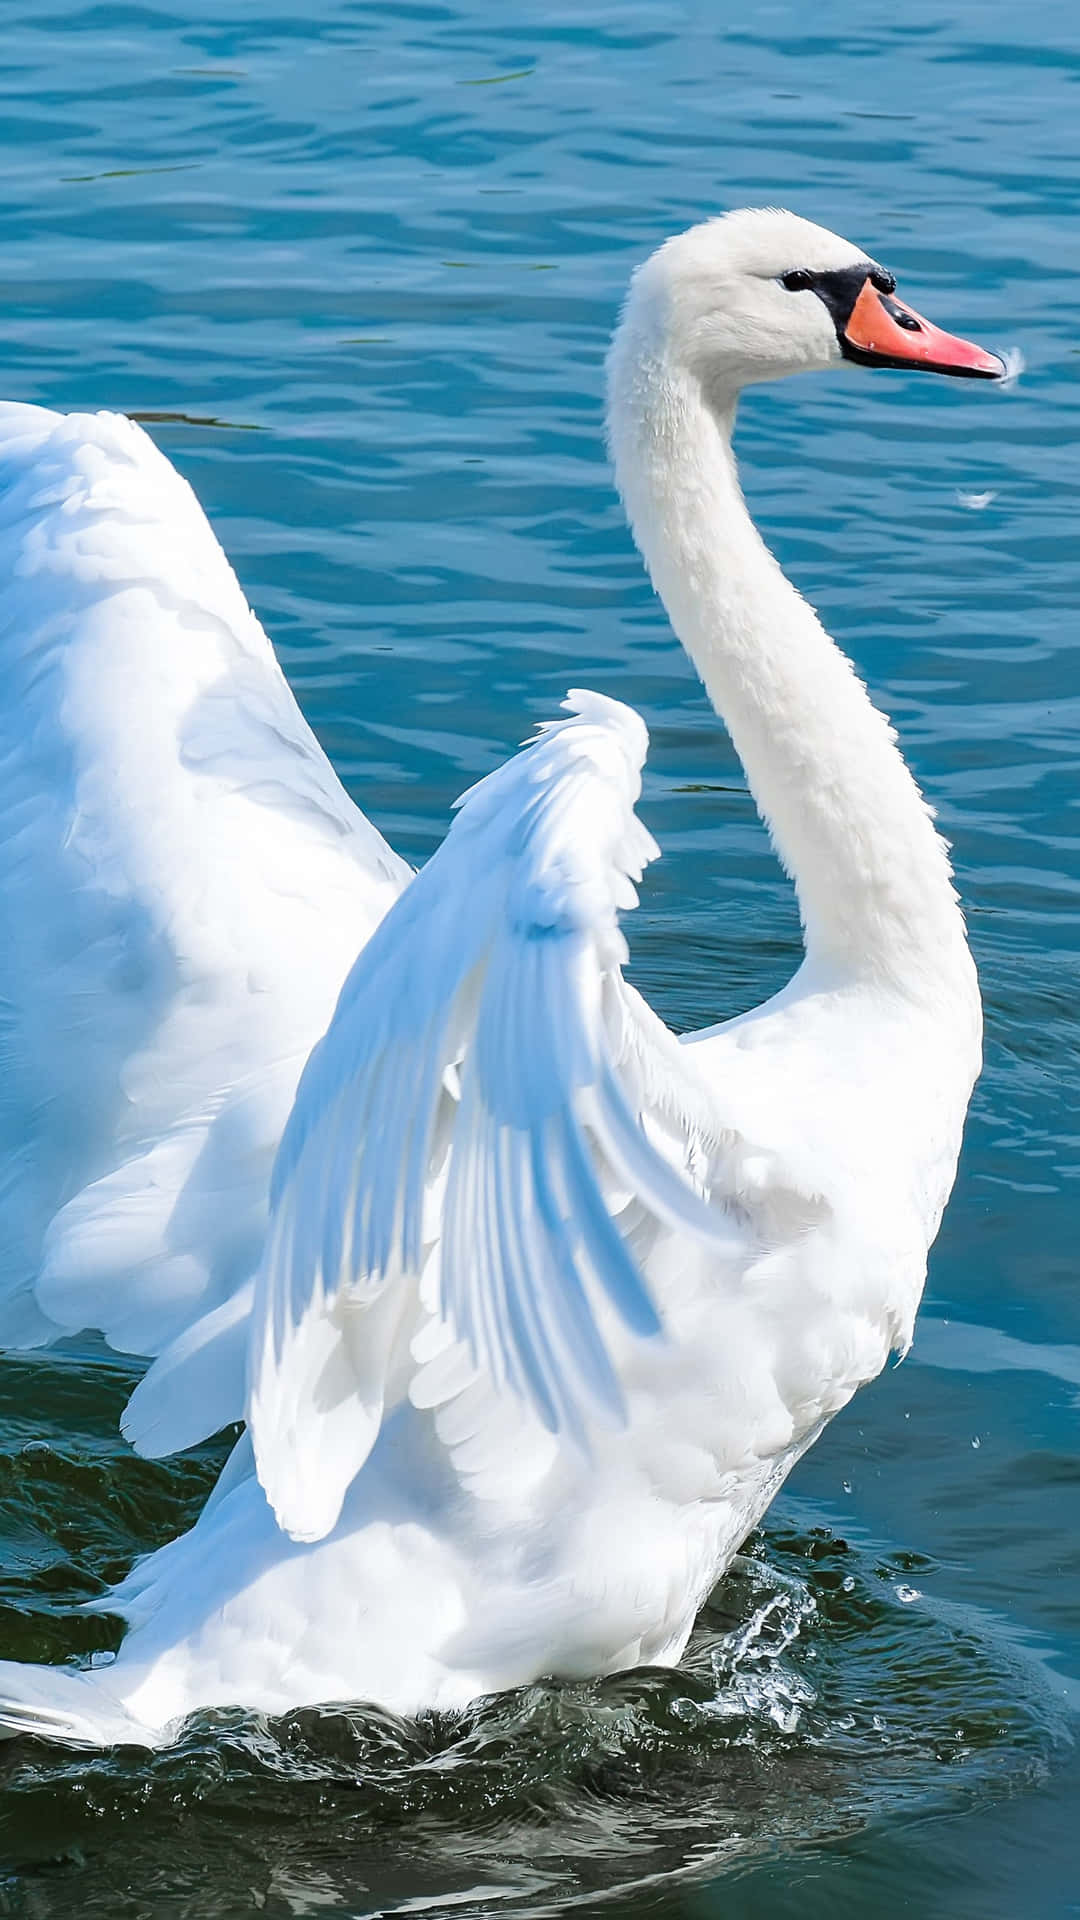 Swan With White Feathers On Water Picture